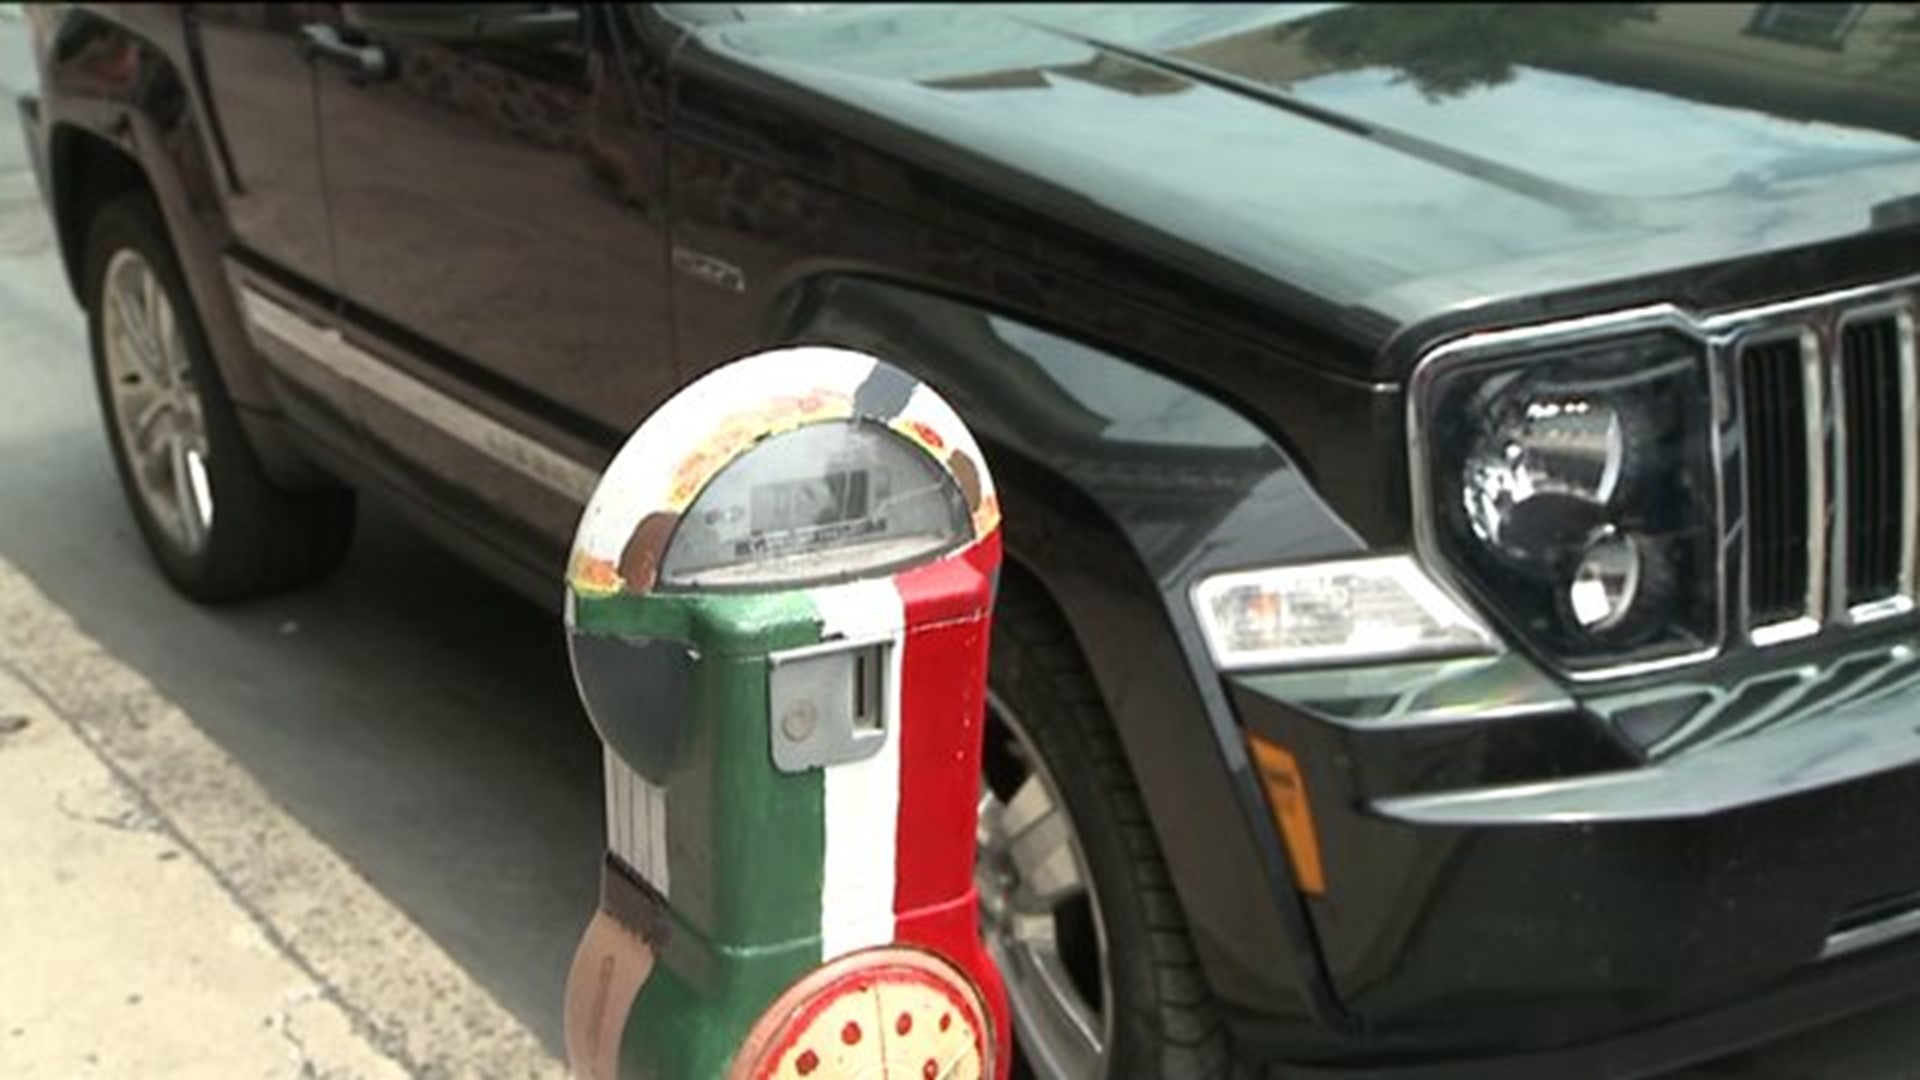 Pottsville to Offer "Courtesy Parking" at Downtown Meters